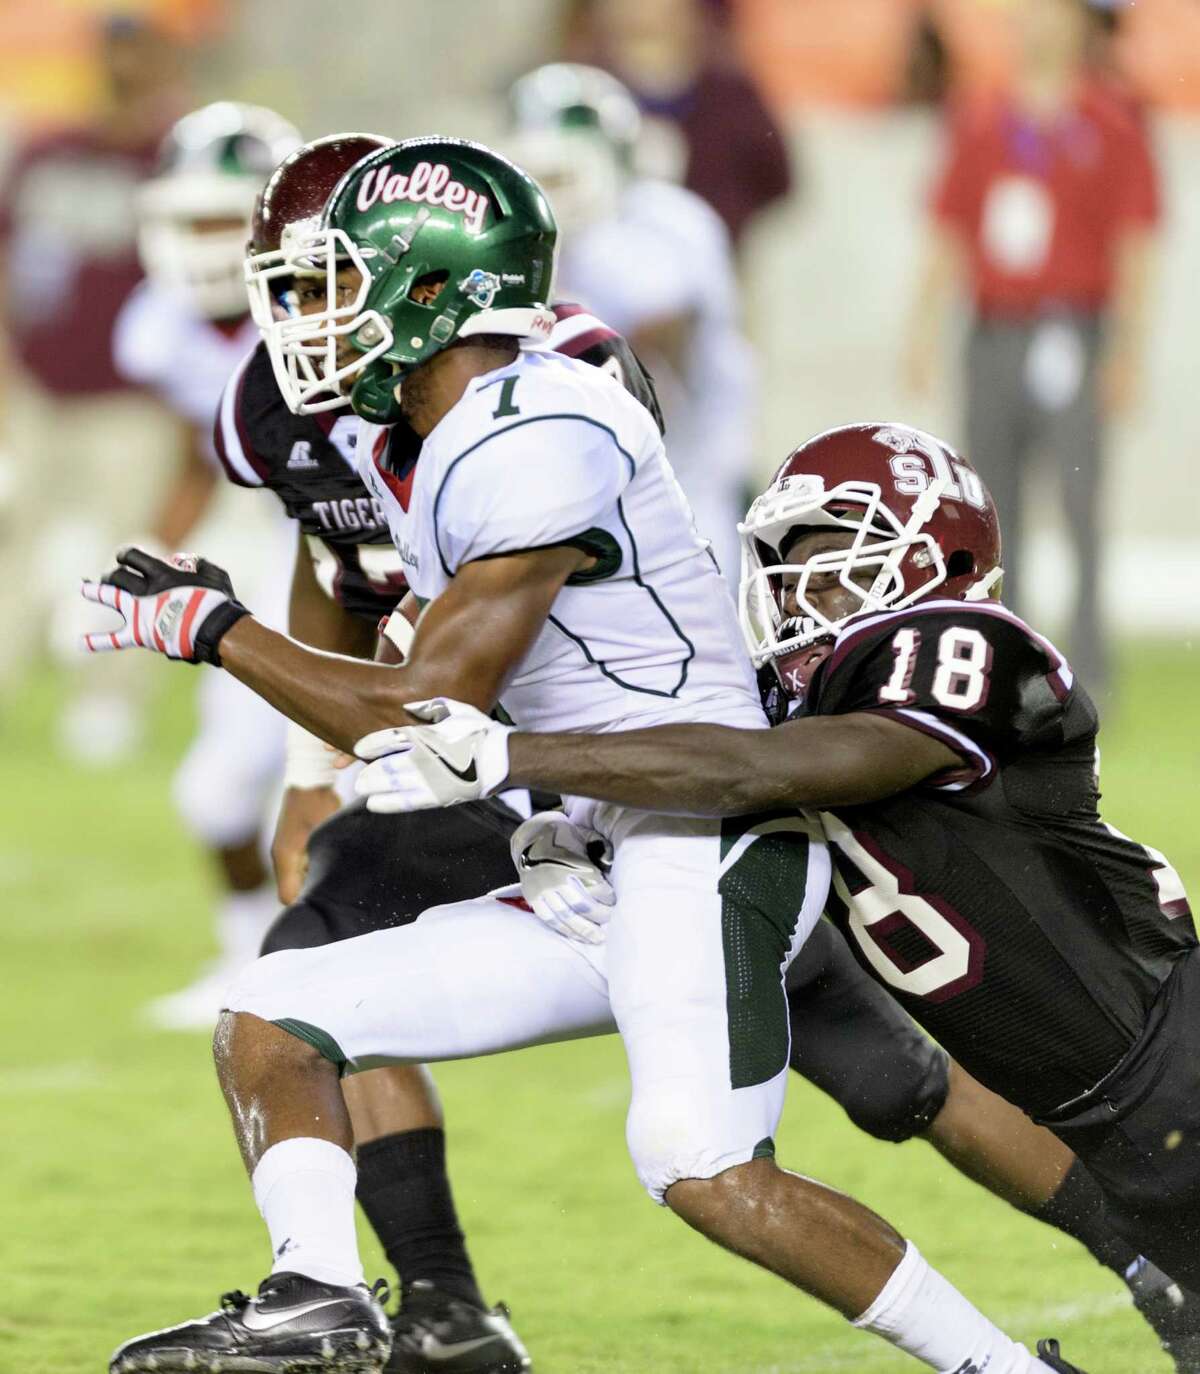 Tre Simms (7) of the Mississippi Valley State Devils is brought down by Jeremiah Credit (18) of the TSU Tigers in the second half of a SWAC college football game on Saturday, September 17, 2016 at BBVA Compass Stadium in Houston Texas.